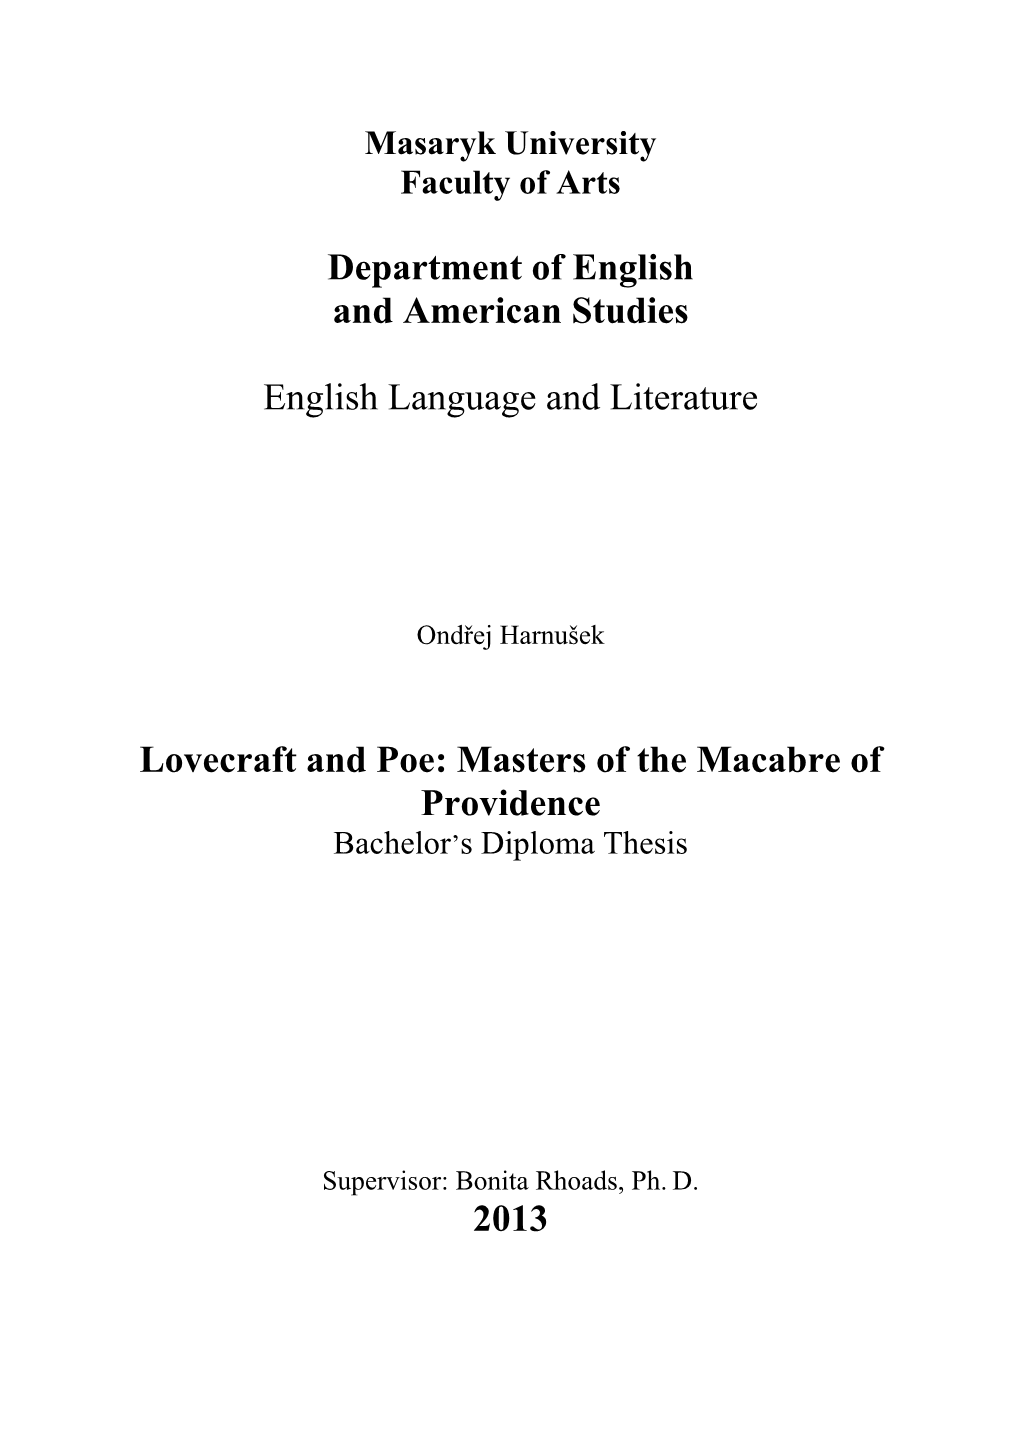 Lovecraft and Poe: Masters of the Macabre of Providence Bachelor‟S Diploma Thesis